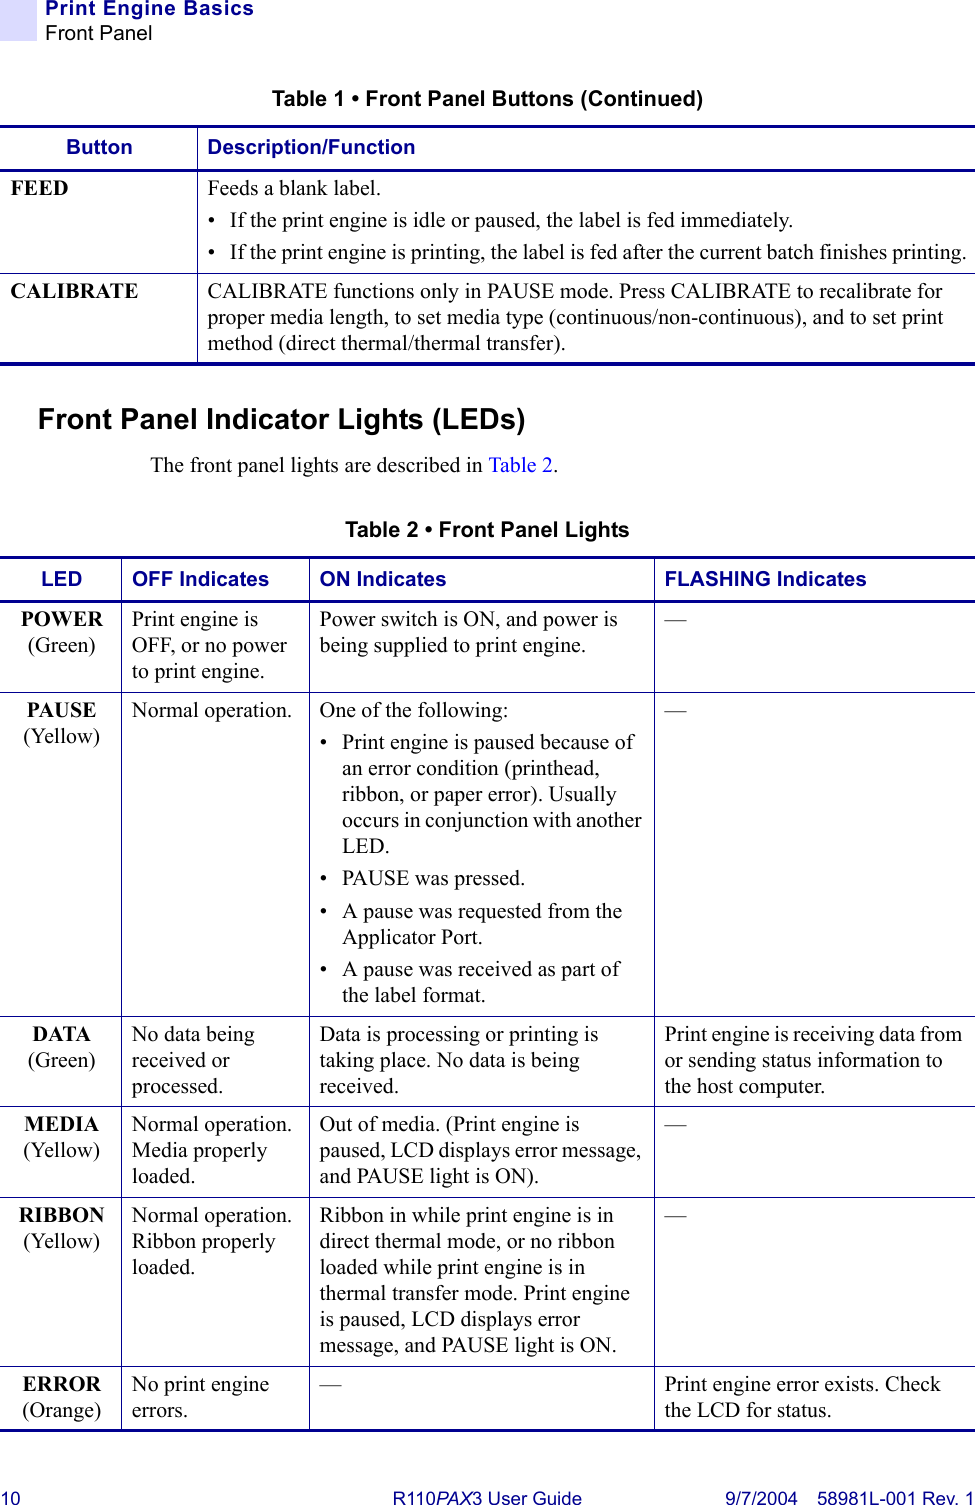 10 R110PA X 3 User Guide 9/7/2004 58981L-001 Rev. 1Print Engine BasicsFront PanelFront Panel Indicator Lights (LEDs)The front panel lights are described in Table 2.FEED Feeds a blank label. • If the print engine is idle or paused, the label is fed immediately. • If the print engine is printing, the label is fed after the current batch finishes printing.CALIBRATE CALIBRATE functions only in PAUSE mode. Press CALIBRATE to recalibrate for proper media length, to set media type (continuous/non-continuous), and to set print method (direct thermal/thermal transfer).Table 1 • Front Panel Buttons (Continued)Button Description/FunctionTable 2 • Front Panel LightsLED OFF Indicates ON Indicates FLASHING IndicatesPOWER(Green)Print engine is OFF, or no power to print engine.Power switch is ON, and power is being supplied to print engine.—PAUSE(Yellow)Normal operation. One of the following:• Print engine is paused because of an error condition (printhead, ribbon, or paper error). Usually occurs in conjunction with another LED.• PAUSE was pressed.• A pause was requested from the Applicator Port.• A pause was received as part of the label format.—DATA(Green)No data being received or processed.Data is processing or printing is taking place. No data is being received.Print engine is receiving data from or sending status information to the host computer.MEDIA(Yellow)Normal operation. Media properly loaded.Out of media. (Print engine is paused, LCD displays error message, and PAUSE light is ON).—RIBBON(Yellow)Normal operation. Ribbon properly loaded.Ribbon in while print engine is in direct thermal mode, or no ribbon loaded while print engine is in thermal transfer mode. Print engine is paused, LCD displays error message, and PAUSE light is ON.—ERROR(Orange)No print engine errors.— Print engine error exists. Check the LCD for status.